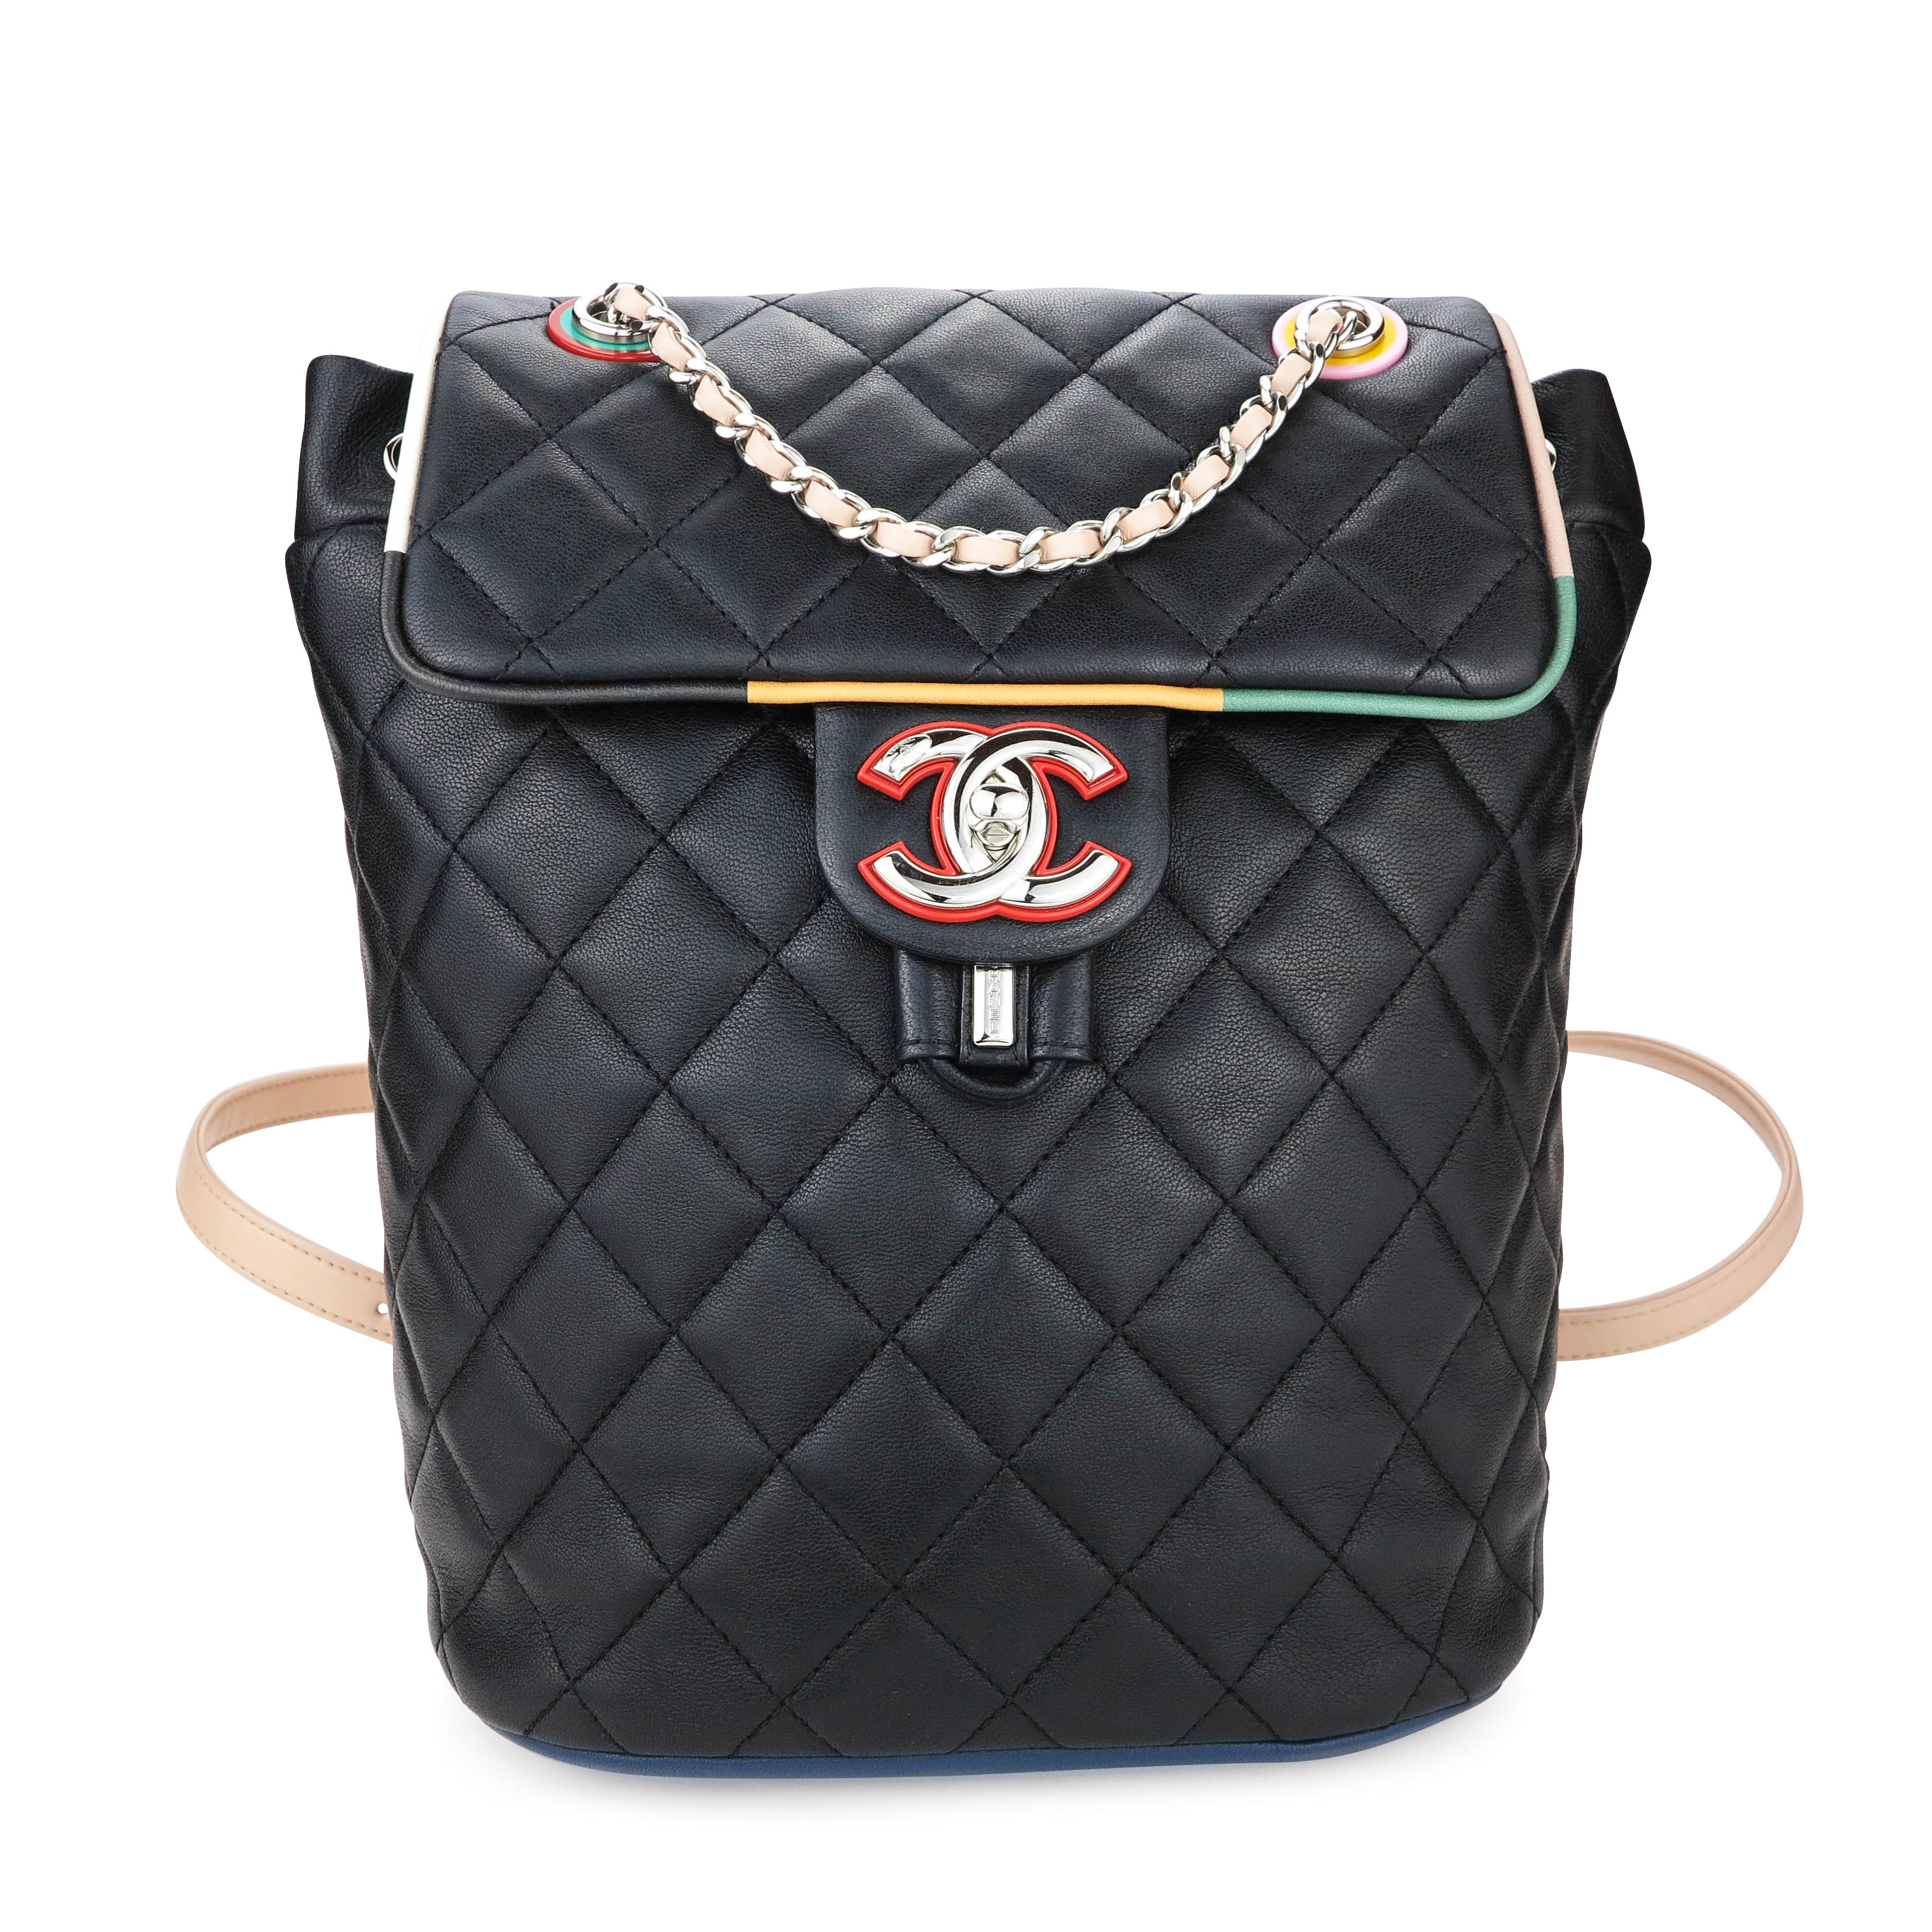 Chanel Small Urban Spirit Quilted Lambskin Backpack Bag